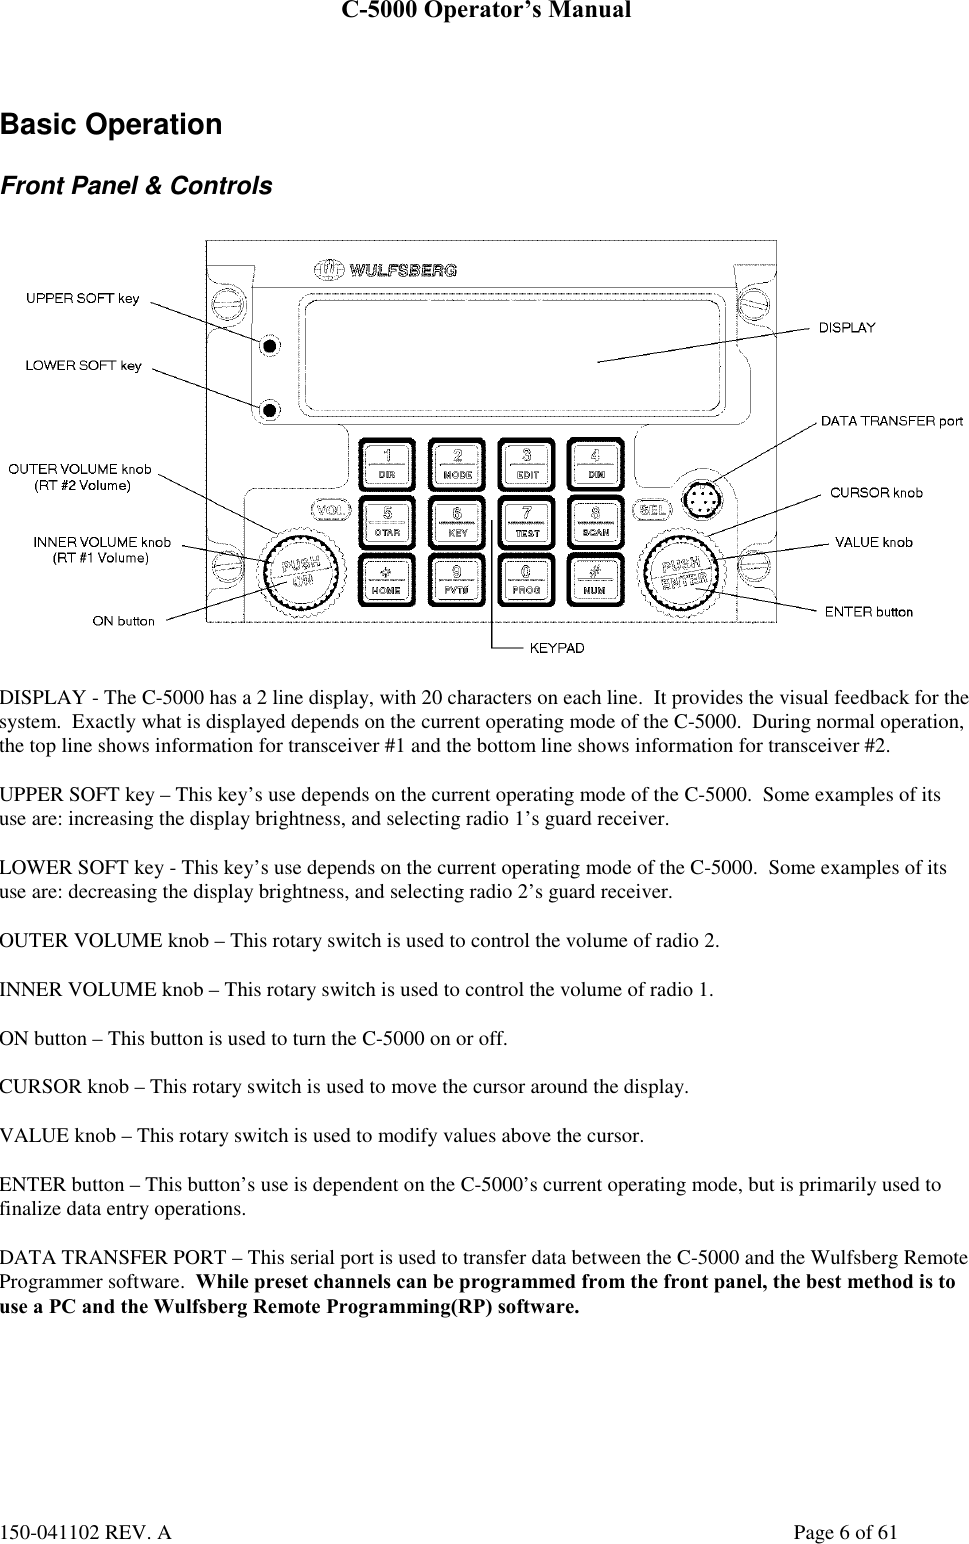 C-5000 Operator’s Manual150-041102 REV. A Page 6 of 61Basic OperationFront Panel &amp; ControlsDISPLAY - The C-5000 has a 2 line display, with 20 characters on each line.  It provides the visual feedback for thesystem.  Exactly what is displayed depends on the current operating mode of the C-5000.  During normal operation,the top line shows information for transceiver #1 and the bottom line shows information for transceiver #2.UPPER SOFT key – This key’s use depends on the current operating mode of the C-5000.  Some examples of itsuse are: increasing the display brightness, and selecting radio 1’s guard receiver.LOWER SOFT key - This key’s use depends on the current operating mode of the C-5000.  Some examples of itsuse are: decreasing the display brightness, and selecting radio 2’s guard receiver.OUTER VOLUME knob – This rotary switch is used to control the volume of radio 2.INNER VOLUME knob – This rotary switch is used to control the volume of radio 1.ON button – This button is used to turn the C-5000 on or off.CURSOR knob – This rotary switch is used to move the cursor around the display.VALUE knob – This rotary switch is used to modify values above the cursor.ENTER button – This button’s use is dependent on the C-5000’s current operating mode, but is primarily used tofinalize data entry operations.DATA TRANSFER PORT – This serial port is used to transfer data between the C-5000 and the Wulfsberg RemoteProgrammer software.  While preset channels can be programmed from the front panel, the best method is touse a PC and the Wulfsberg Remote Programming(RP) software.